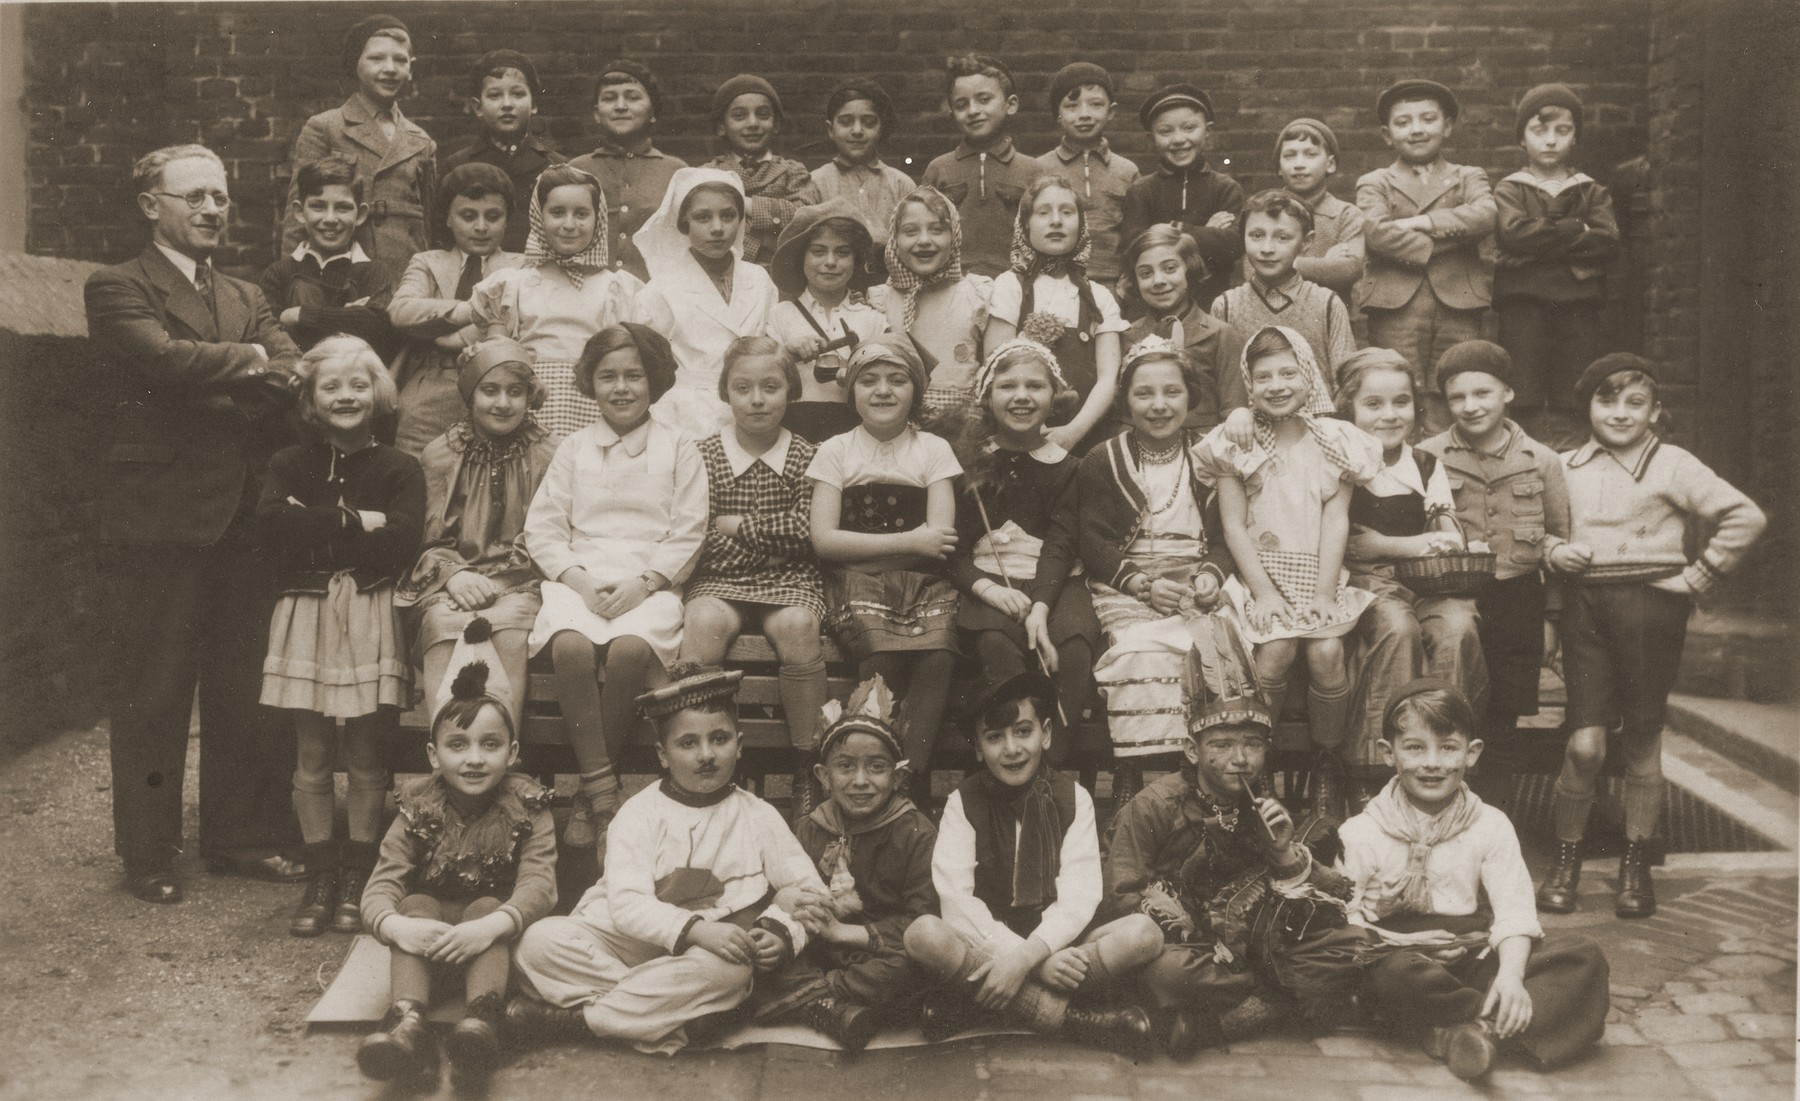 Group portrait of students at the Israelitische Volkschule Essen dressed up in Purim costumes.  

Among those pictured is the teacher, Fritz Kaiser, (standing at the left), and Heinz Straus (front row, fourth from the left).